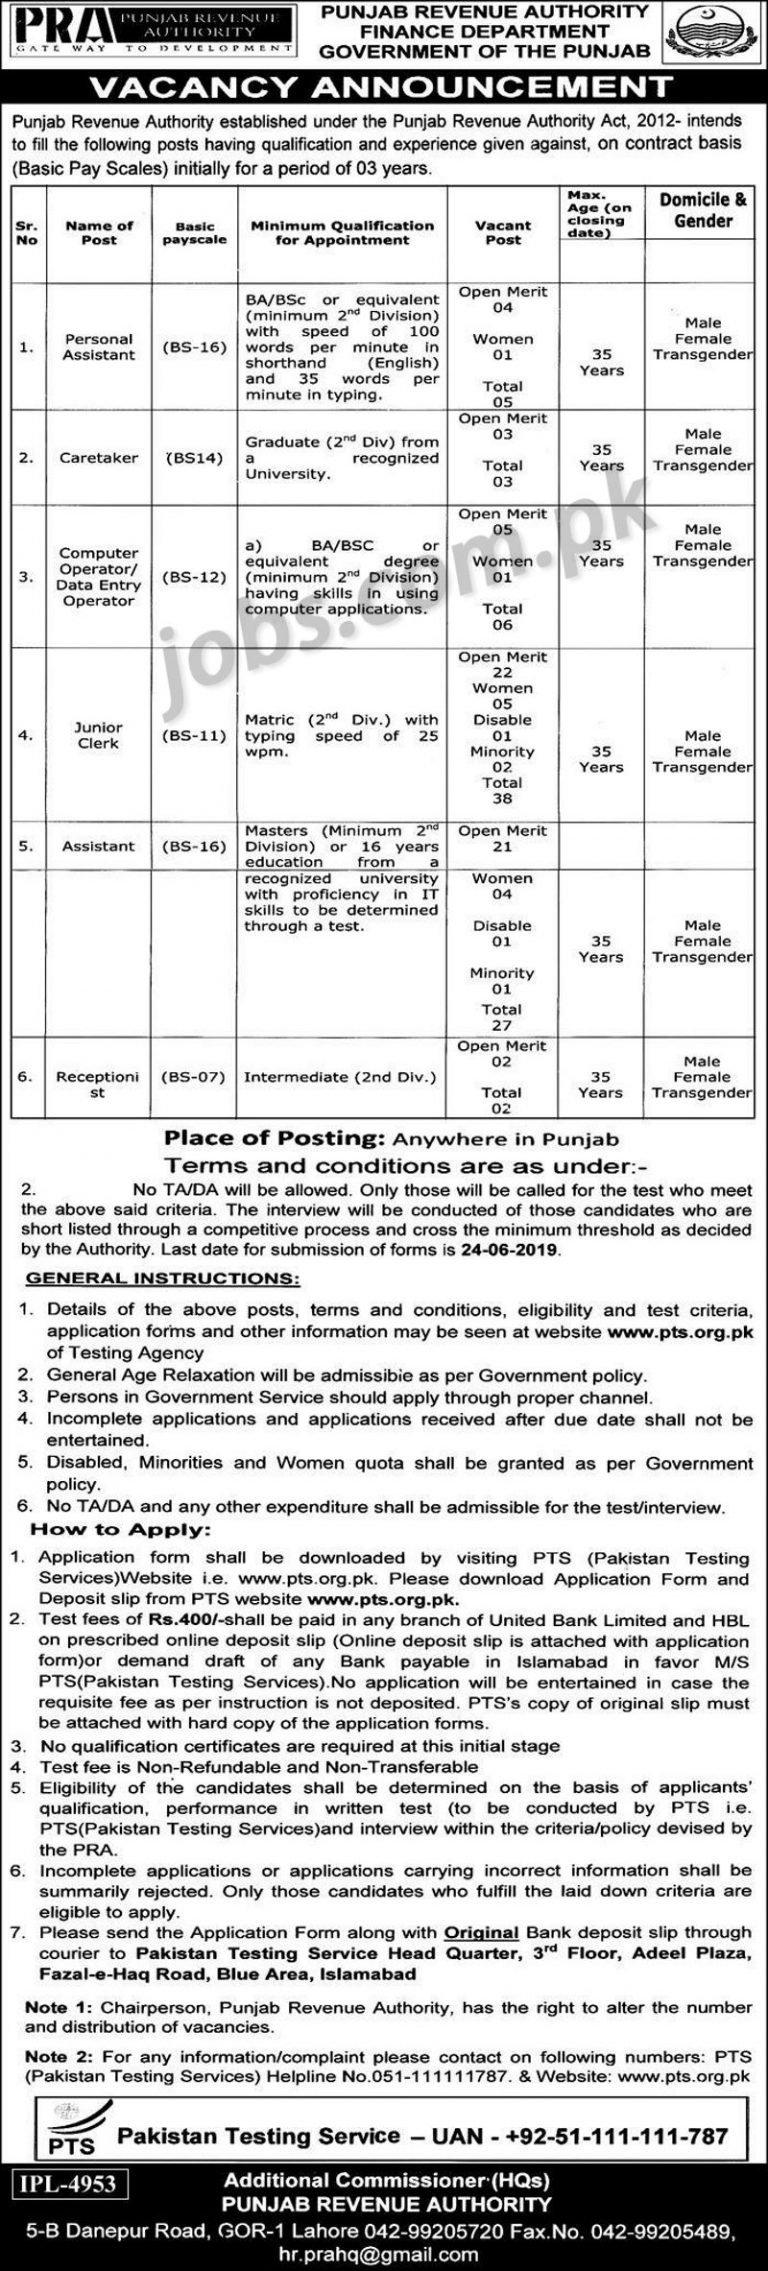 Punjab Revenue Authority (PRA) Jobs 2019 for 102+ Jr Clerks, Assistants, DEO & Other Posts (Download PTS Form)